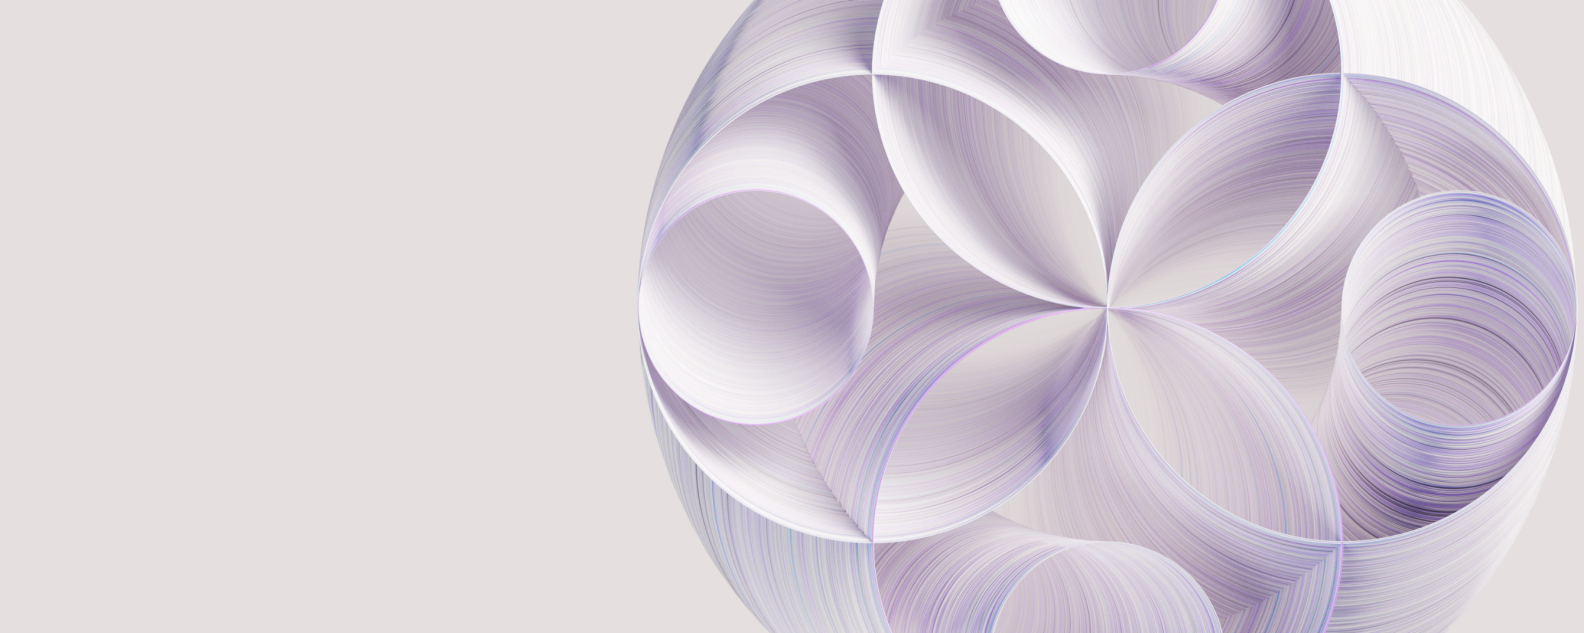 Abstract image of purple concentric circles intersecting